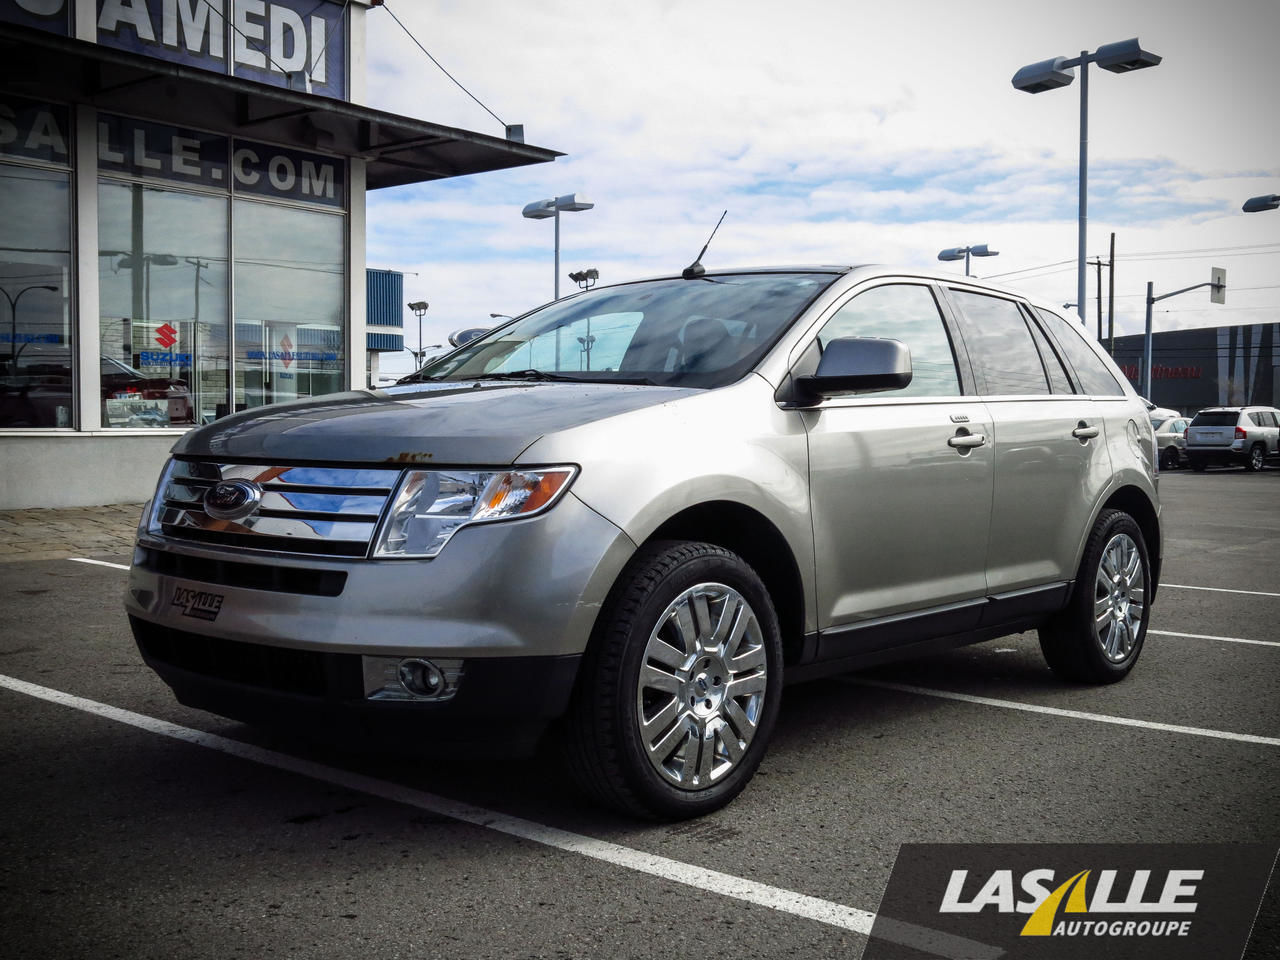 2008 Ford edge limited price #7